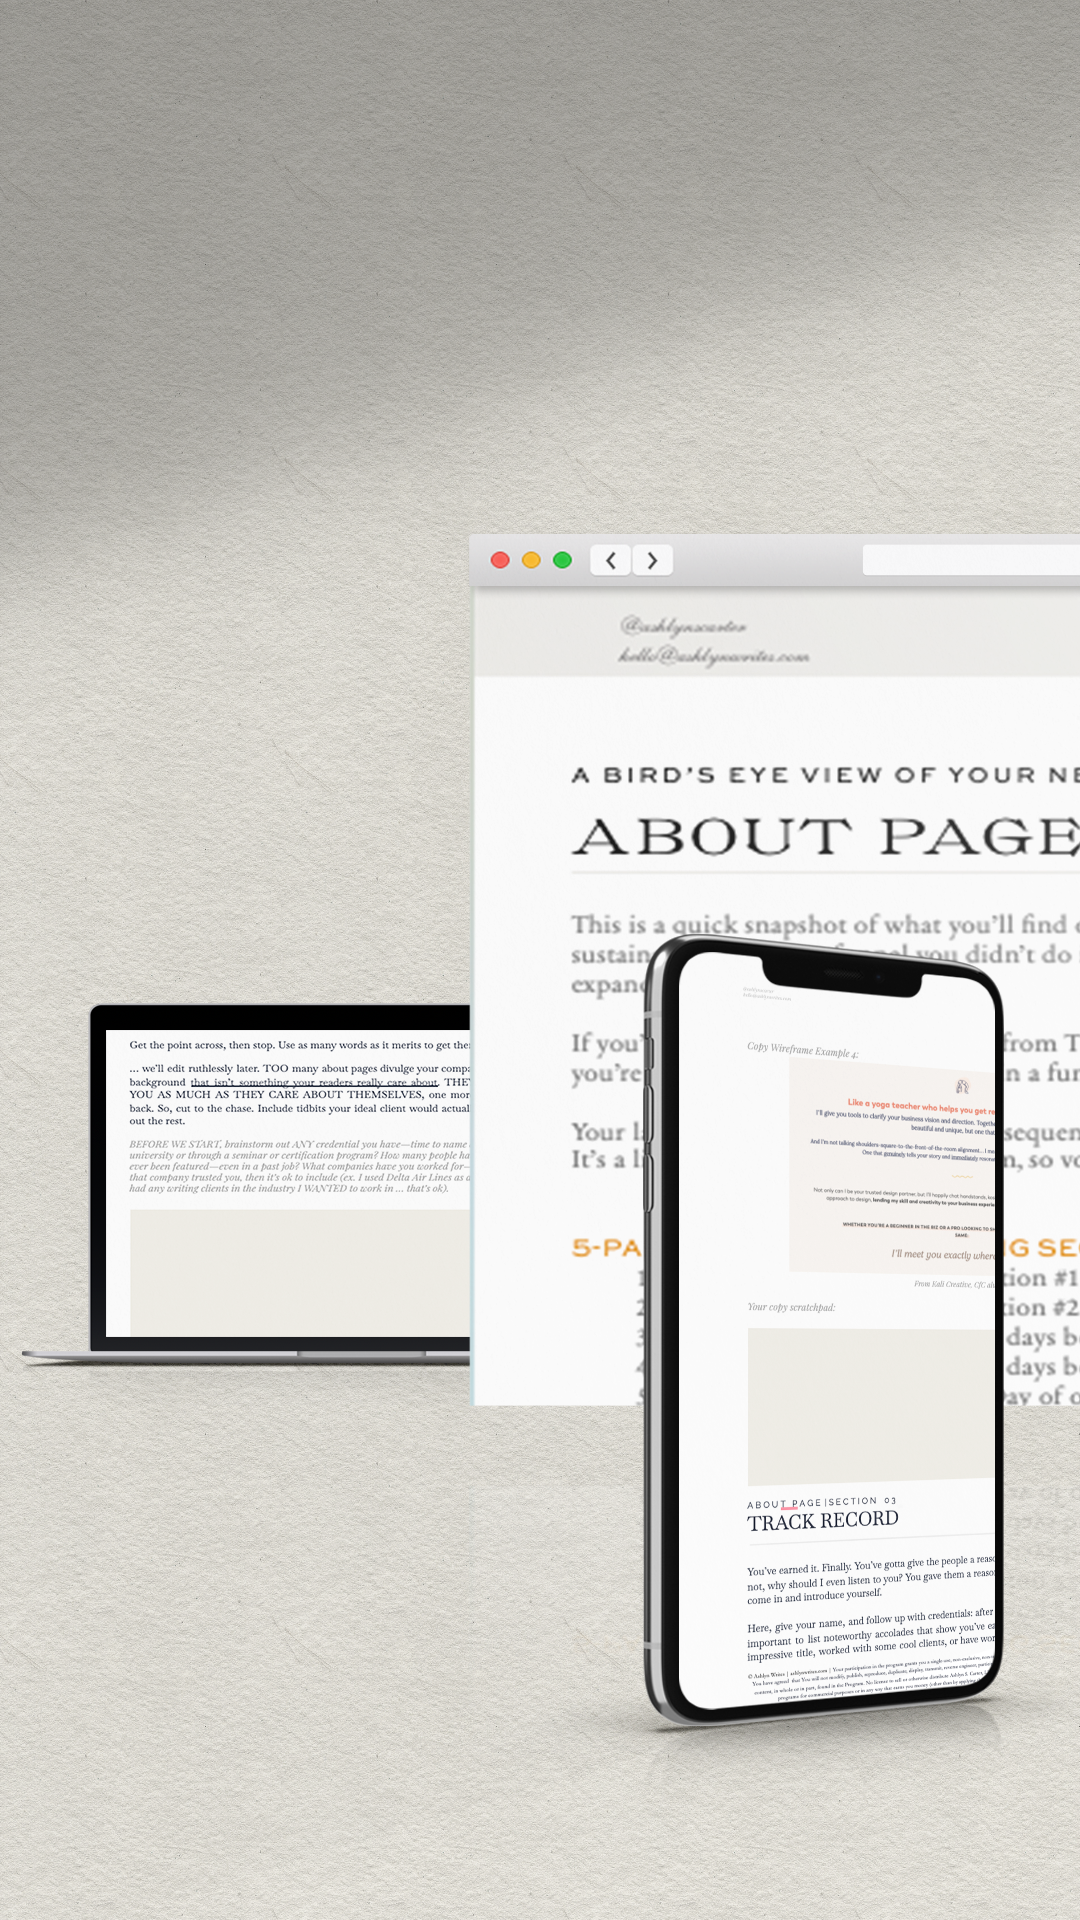 About Page Copy Template